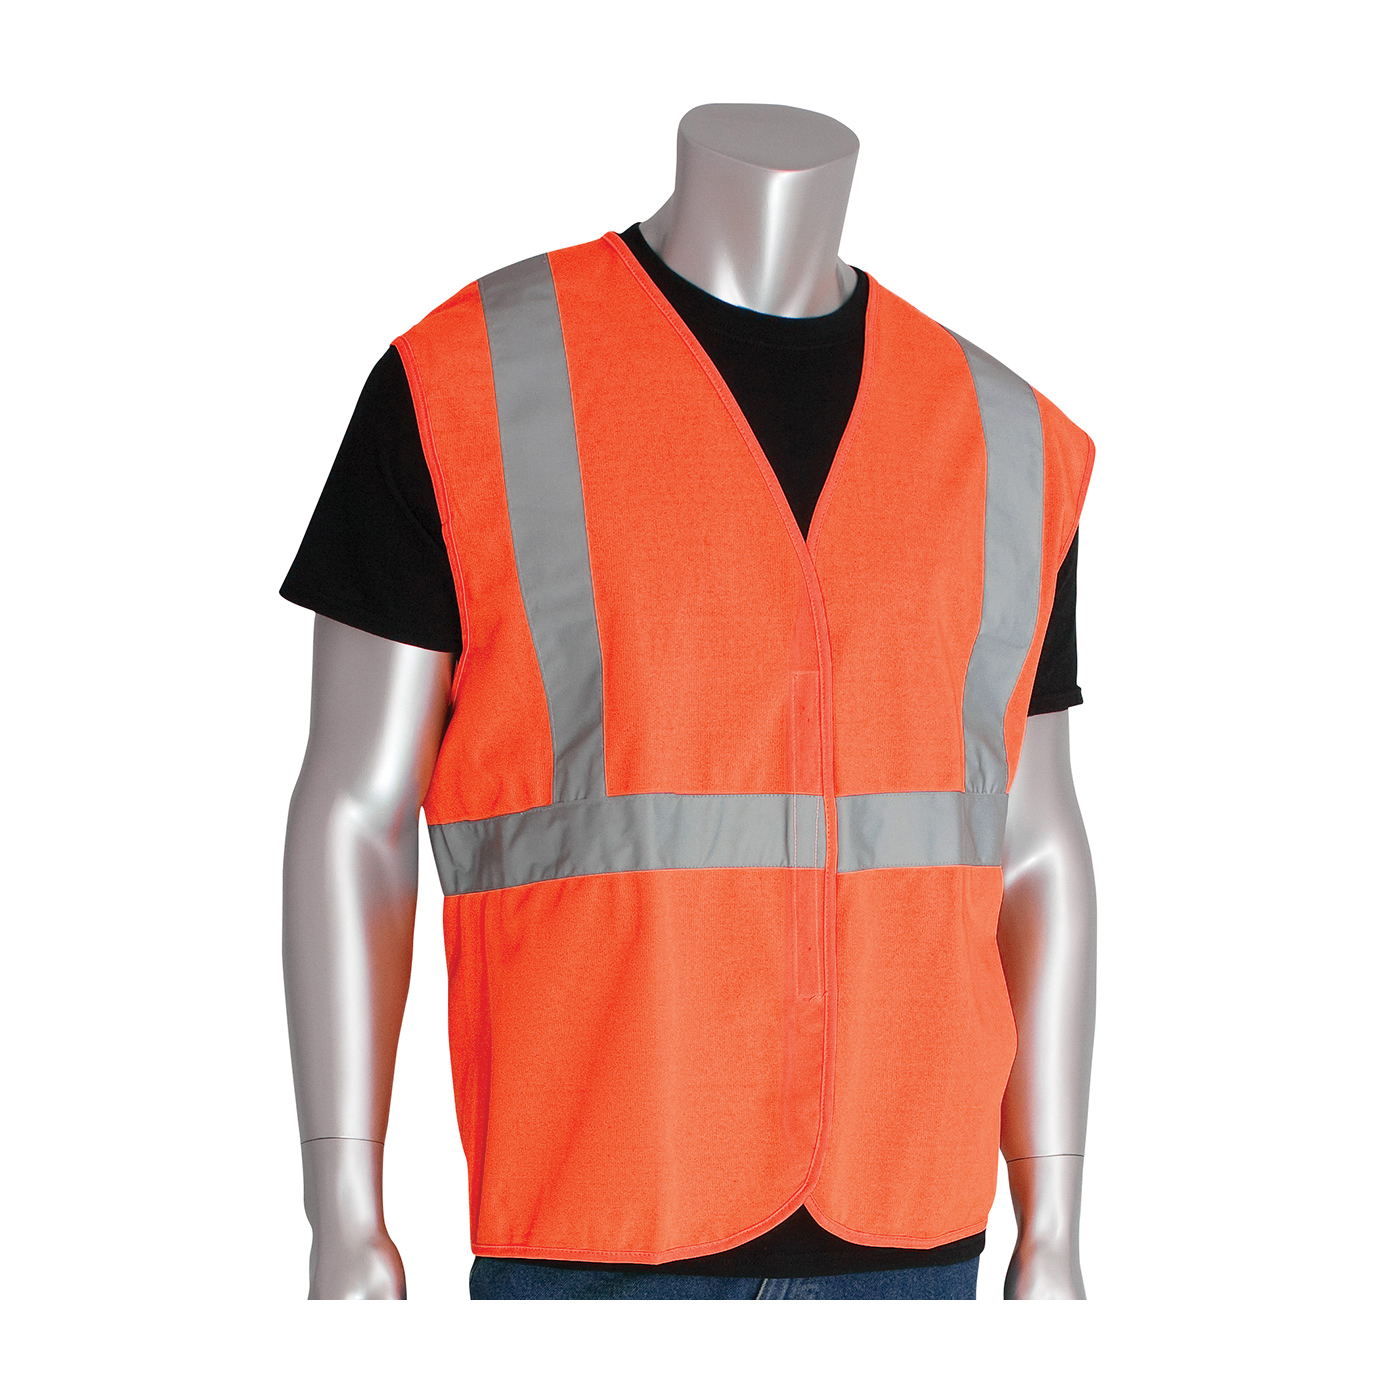 PIP® 302-WCENGOR-S Solid Vest, S, Hi-Viz Orange, Polyester, Hook and Loop Closure, ANSI Class: Class 2, Specifications Met: ANSI 107 Type R